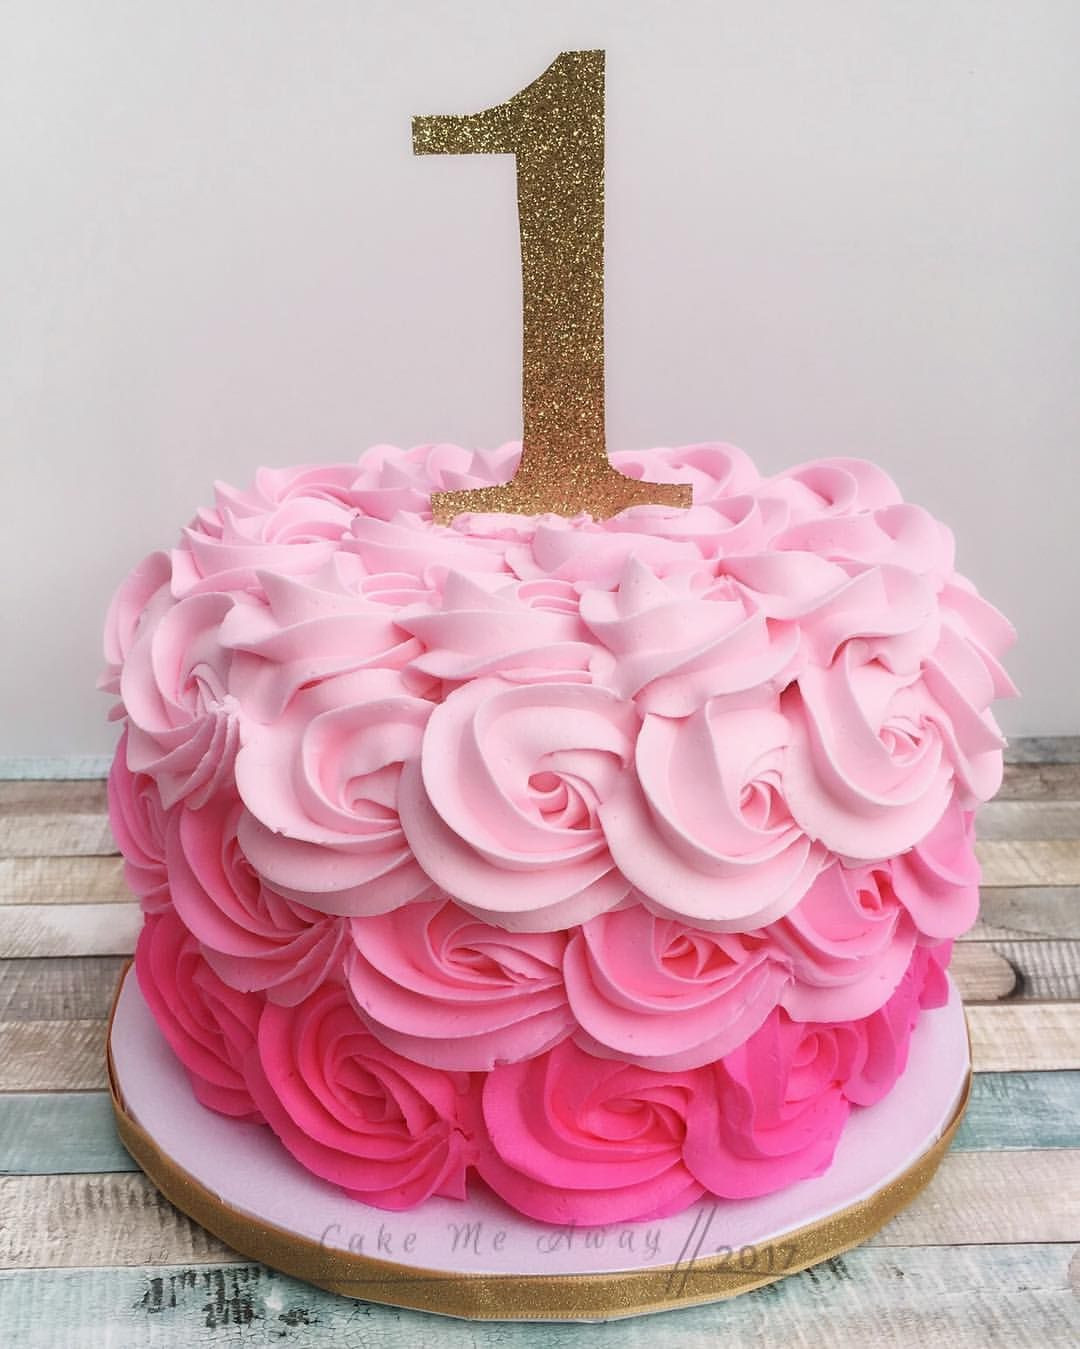 Birthday Cake For 1 Year Old Baby Girl
 Pin by Ronda Sanborn on Cake ideas in 2019